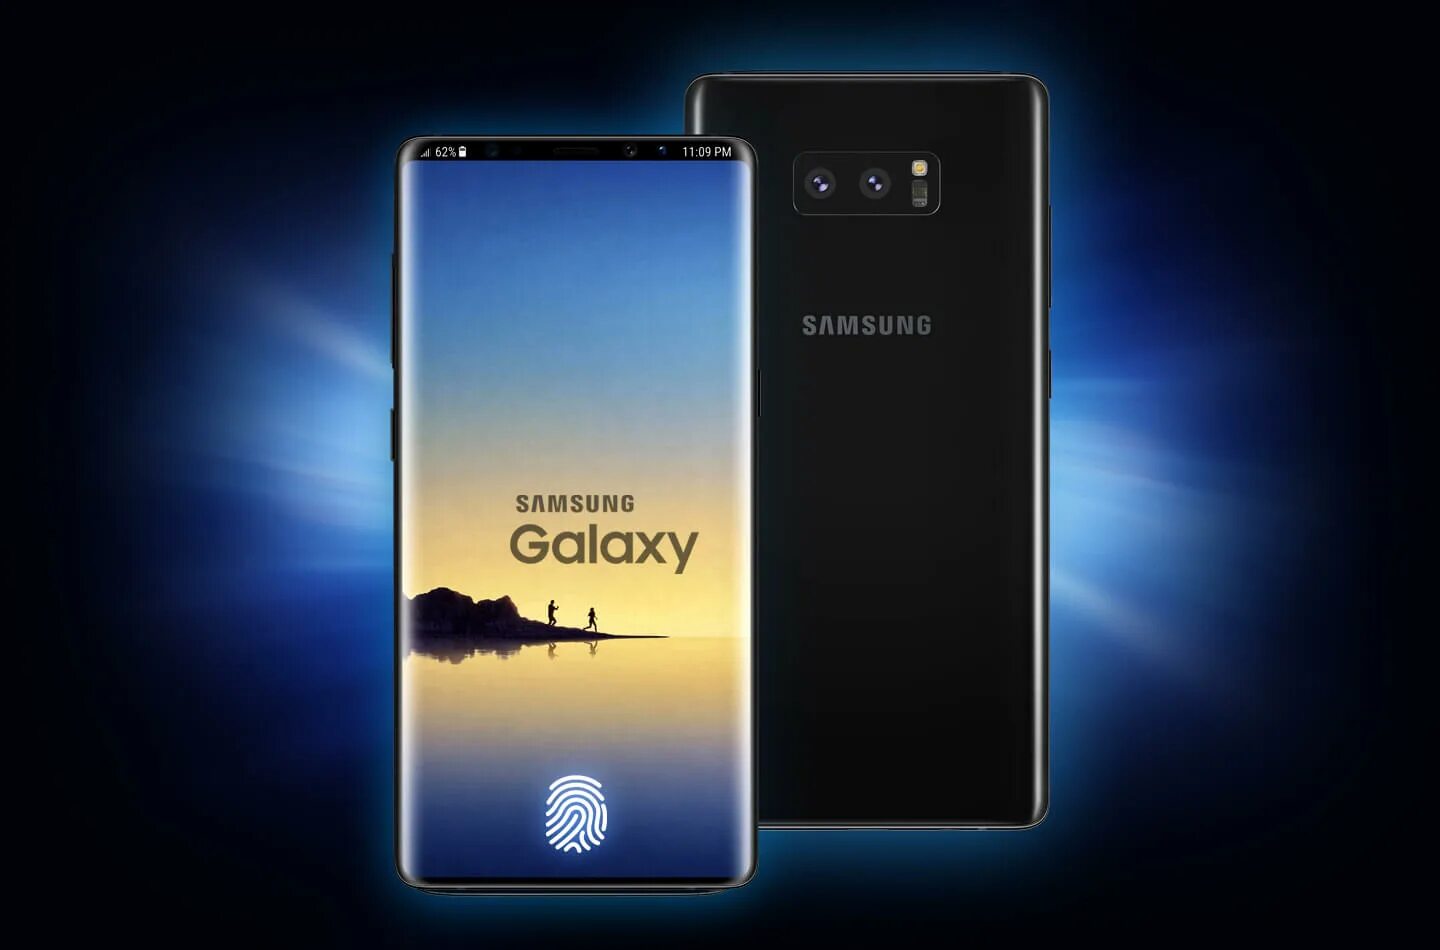 Note 9 plus. Samsung Galaxy Note 9. Note 9 Samsung габариты. Самсунг галакси нот 9 Размеры. Samsung Galaxy s Note.